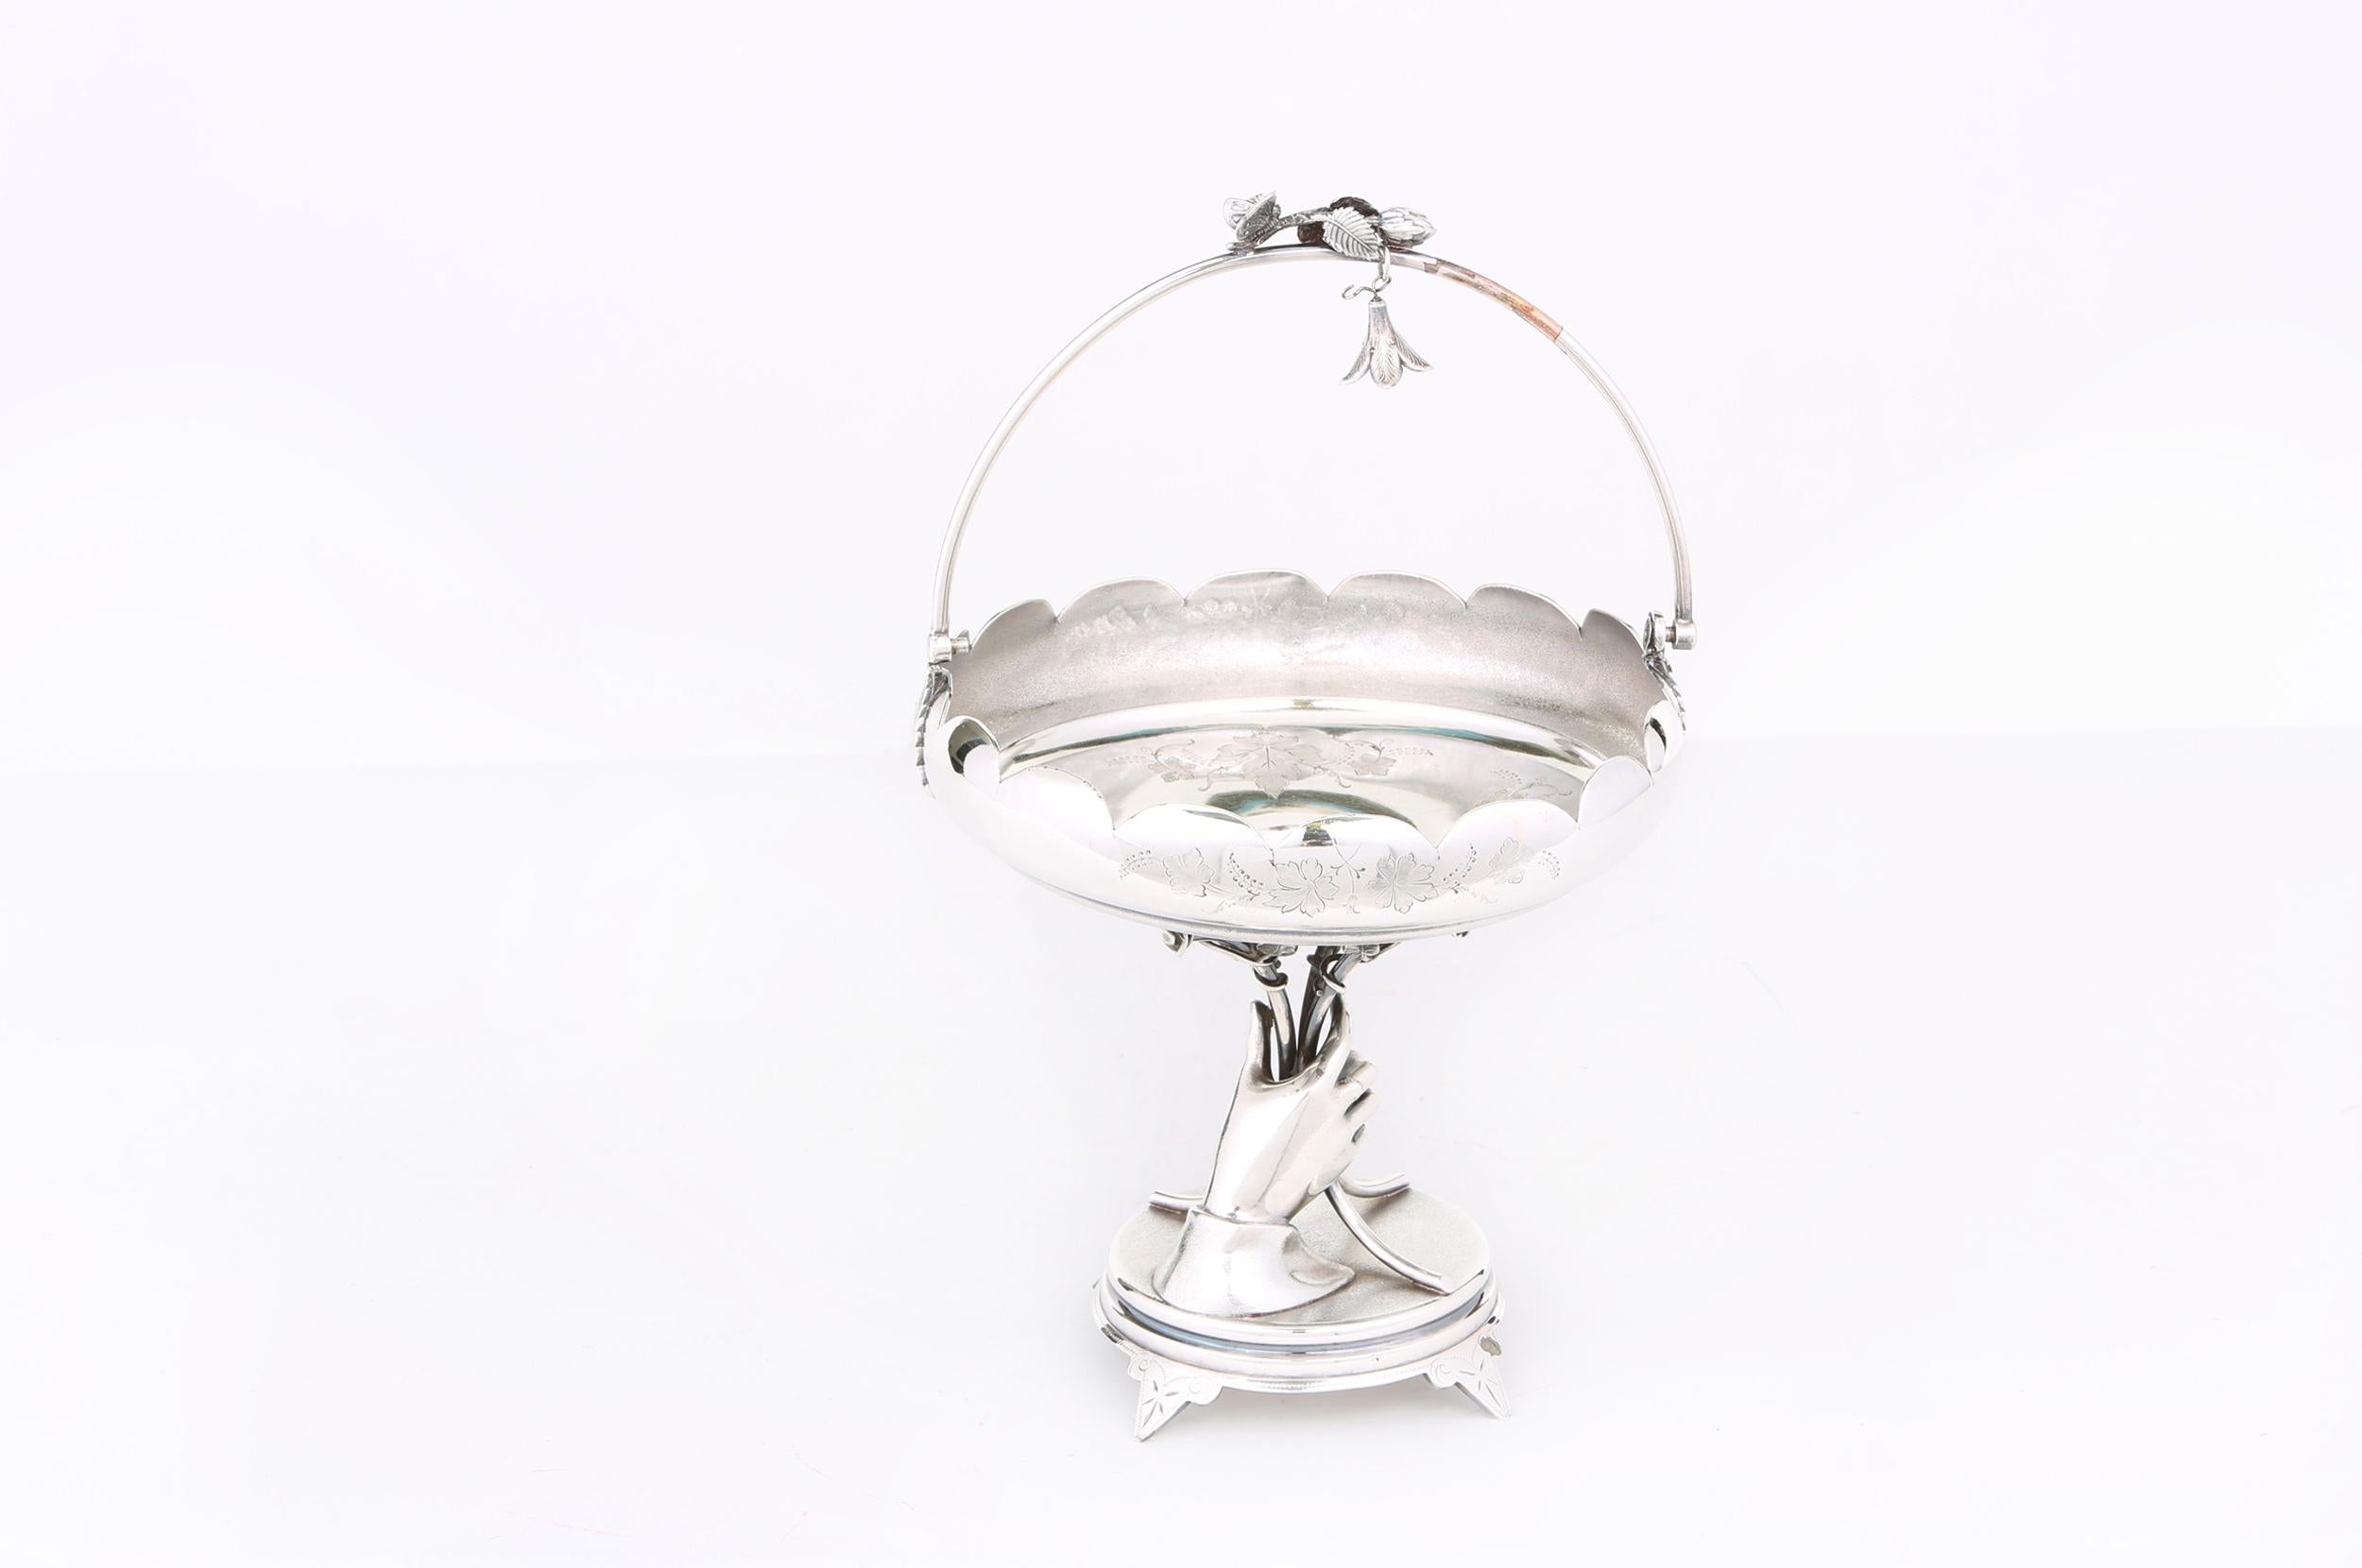 North American silver plated centerpiece in the form of a basket held by a silver plated hand on four twigs with flowers mimicking a bouquet. Great antique condition with minor wear consistent with age / use. Maker's mark undersigned 